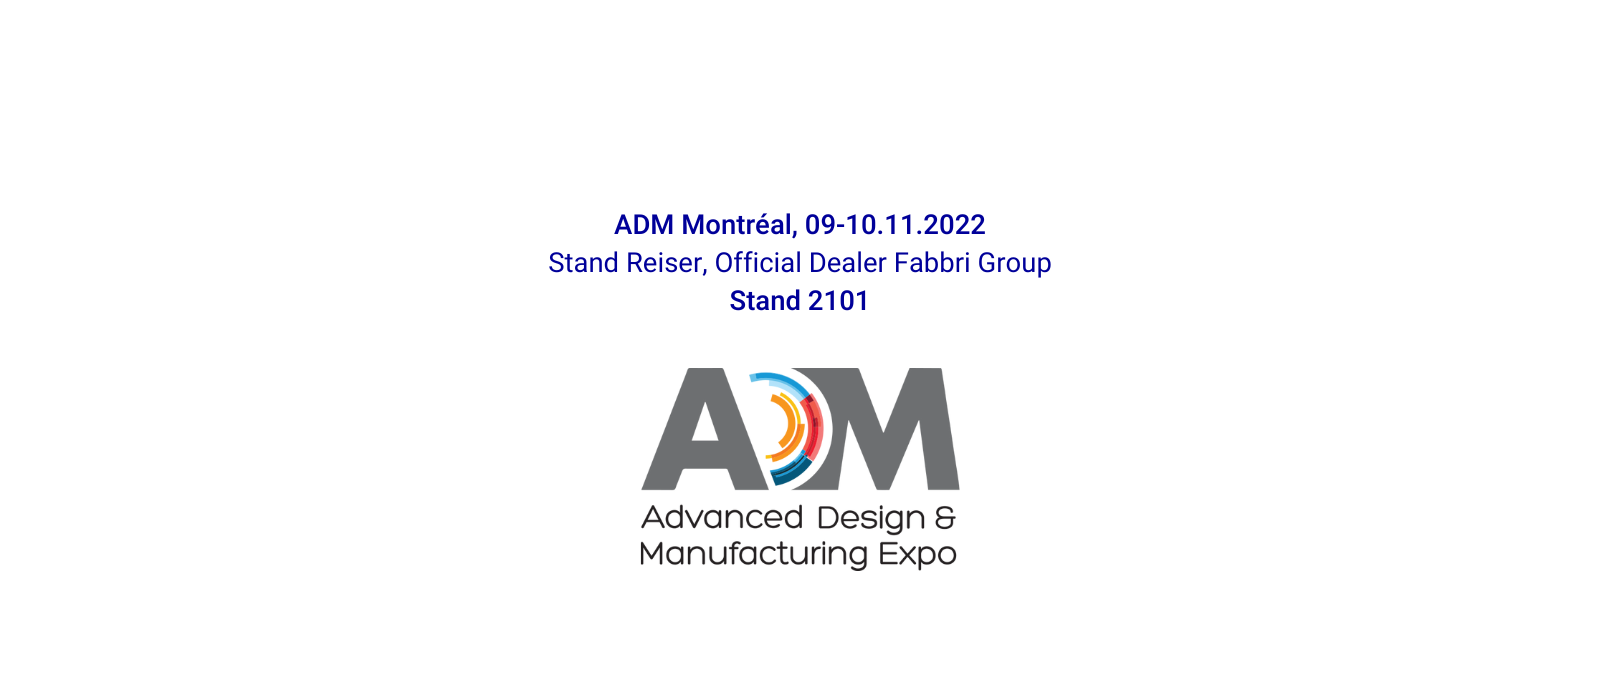 Pack Ex/ADM Montréal 2022: new appointment for Fabbri Group